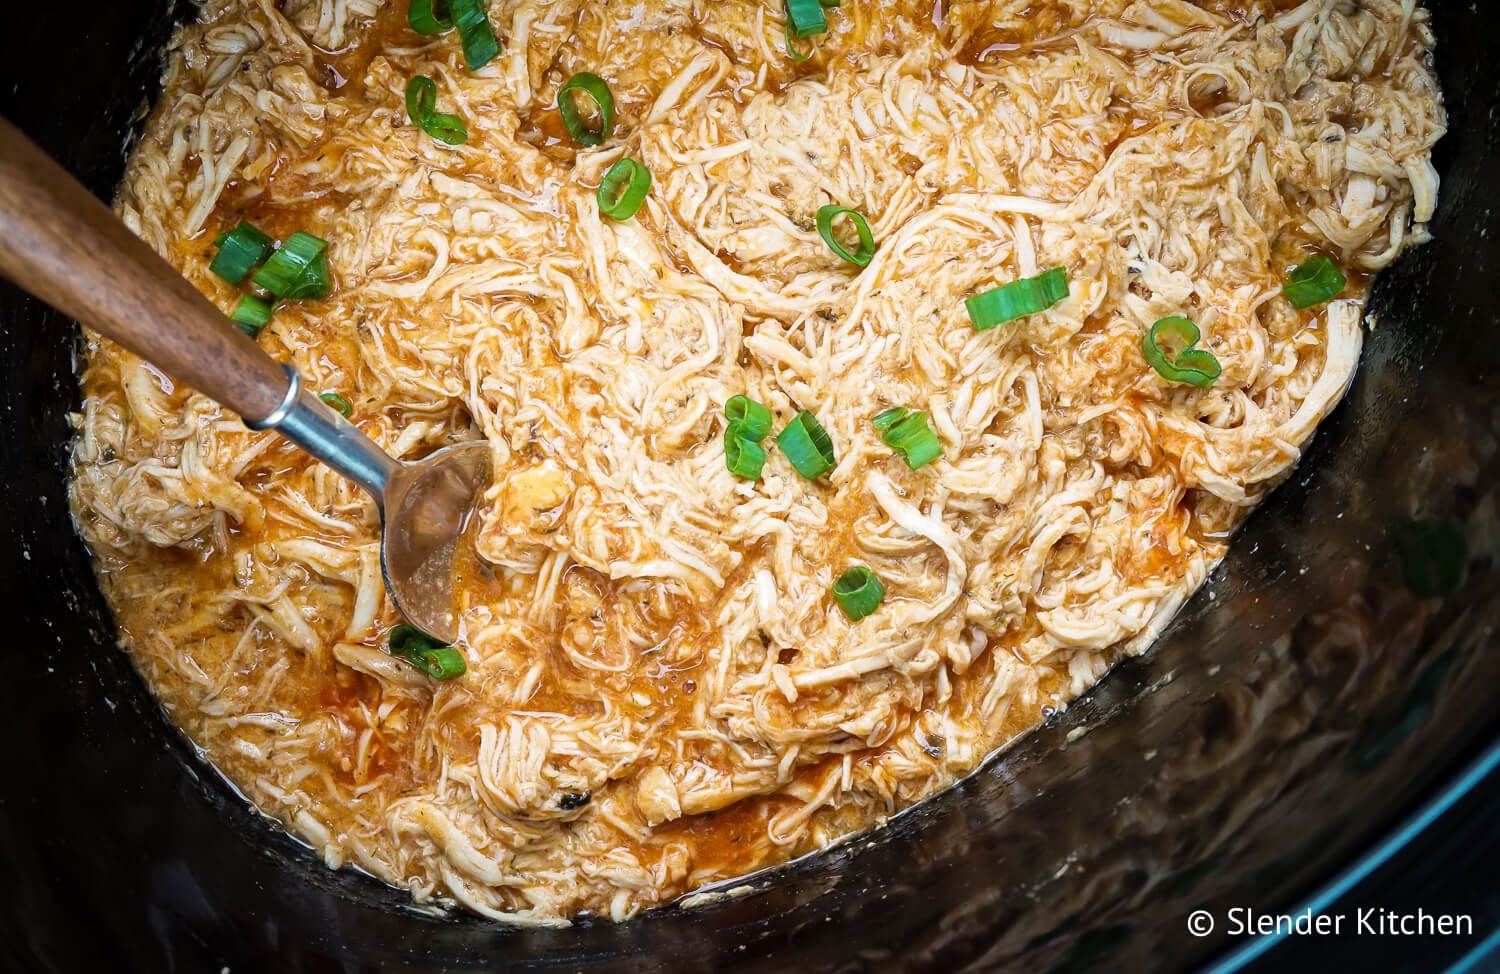 Crockpot buffalo chicken shredded with buffalo sauce and green onions in a black slow cooker.